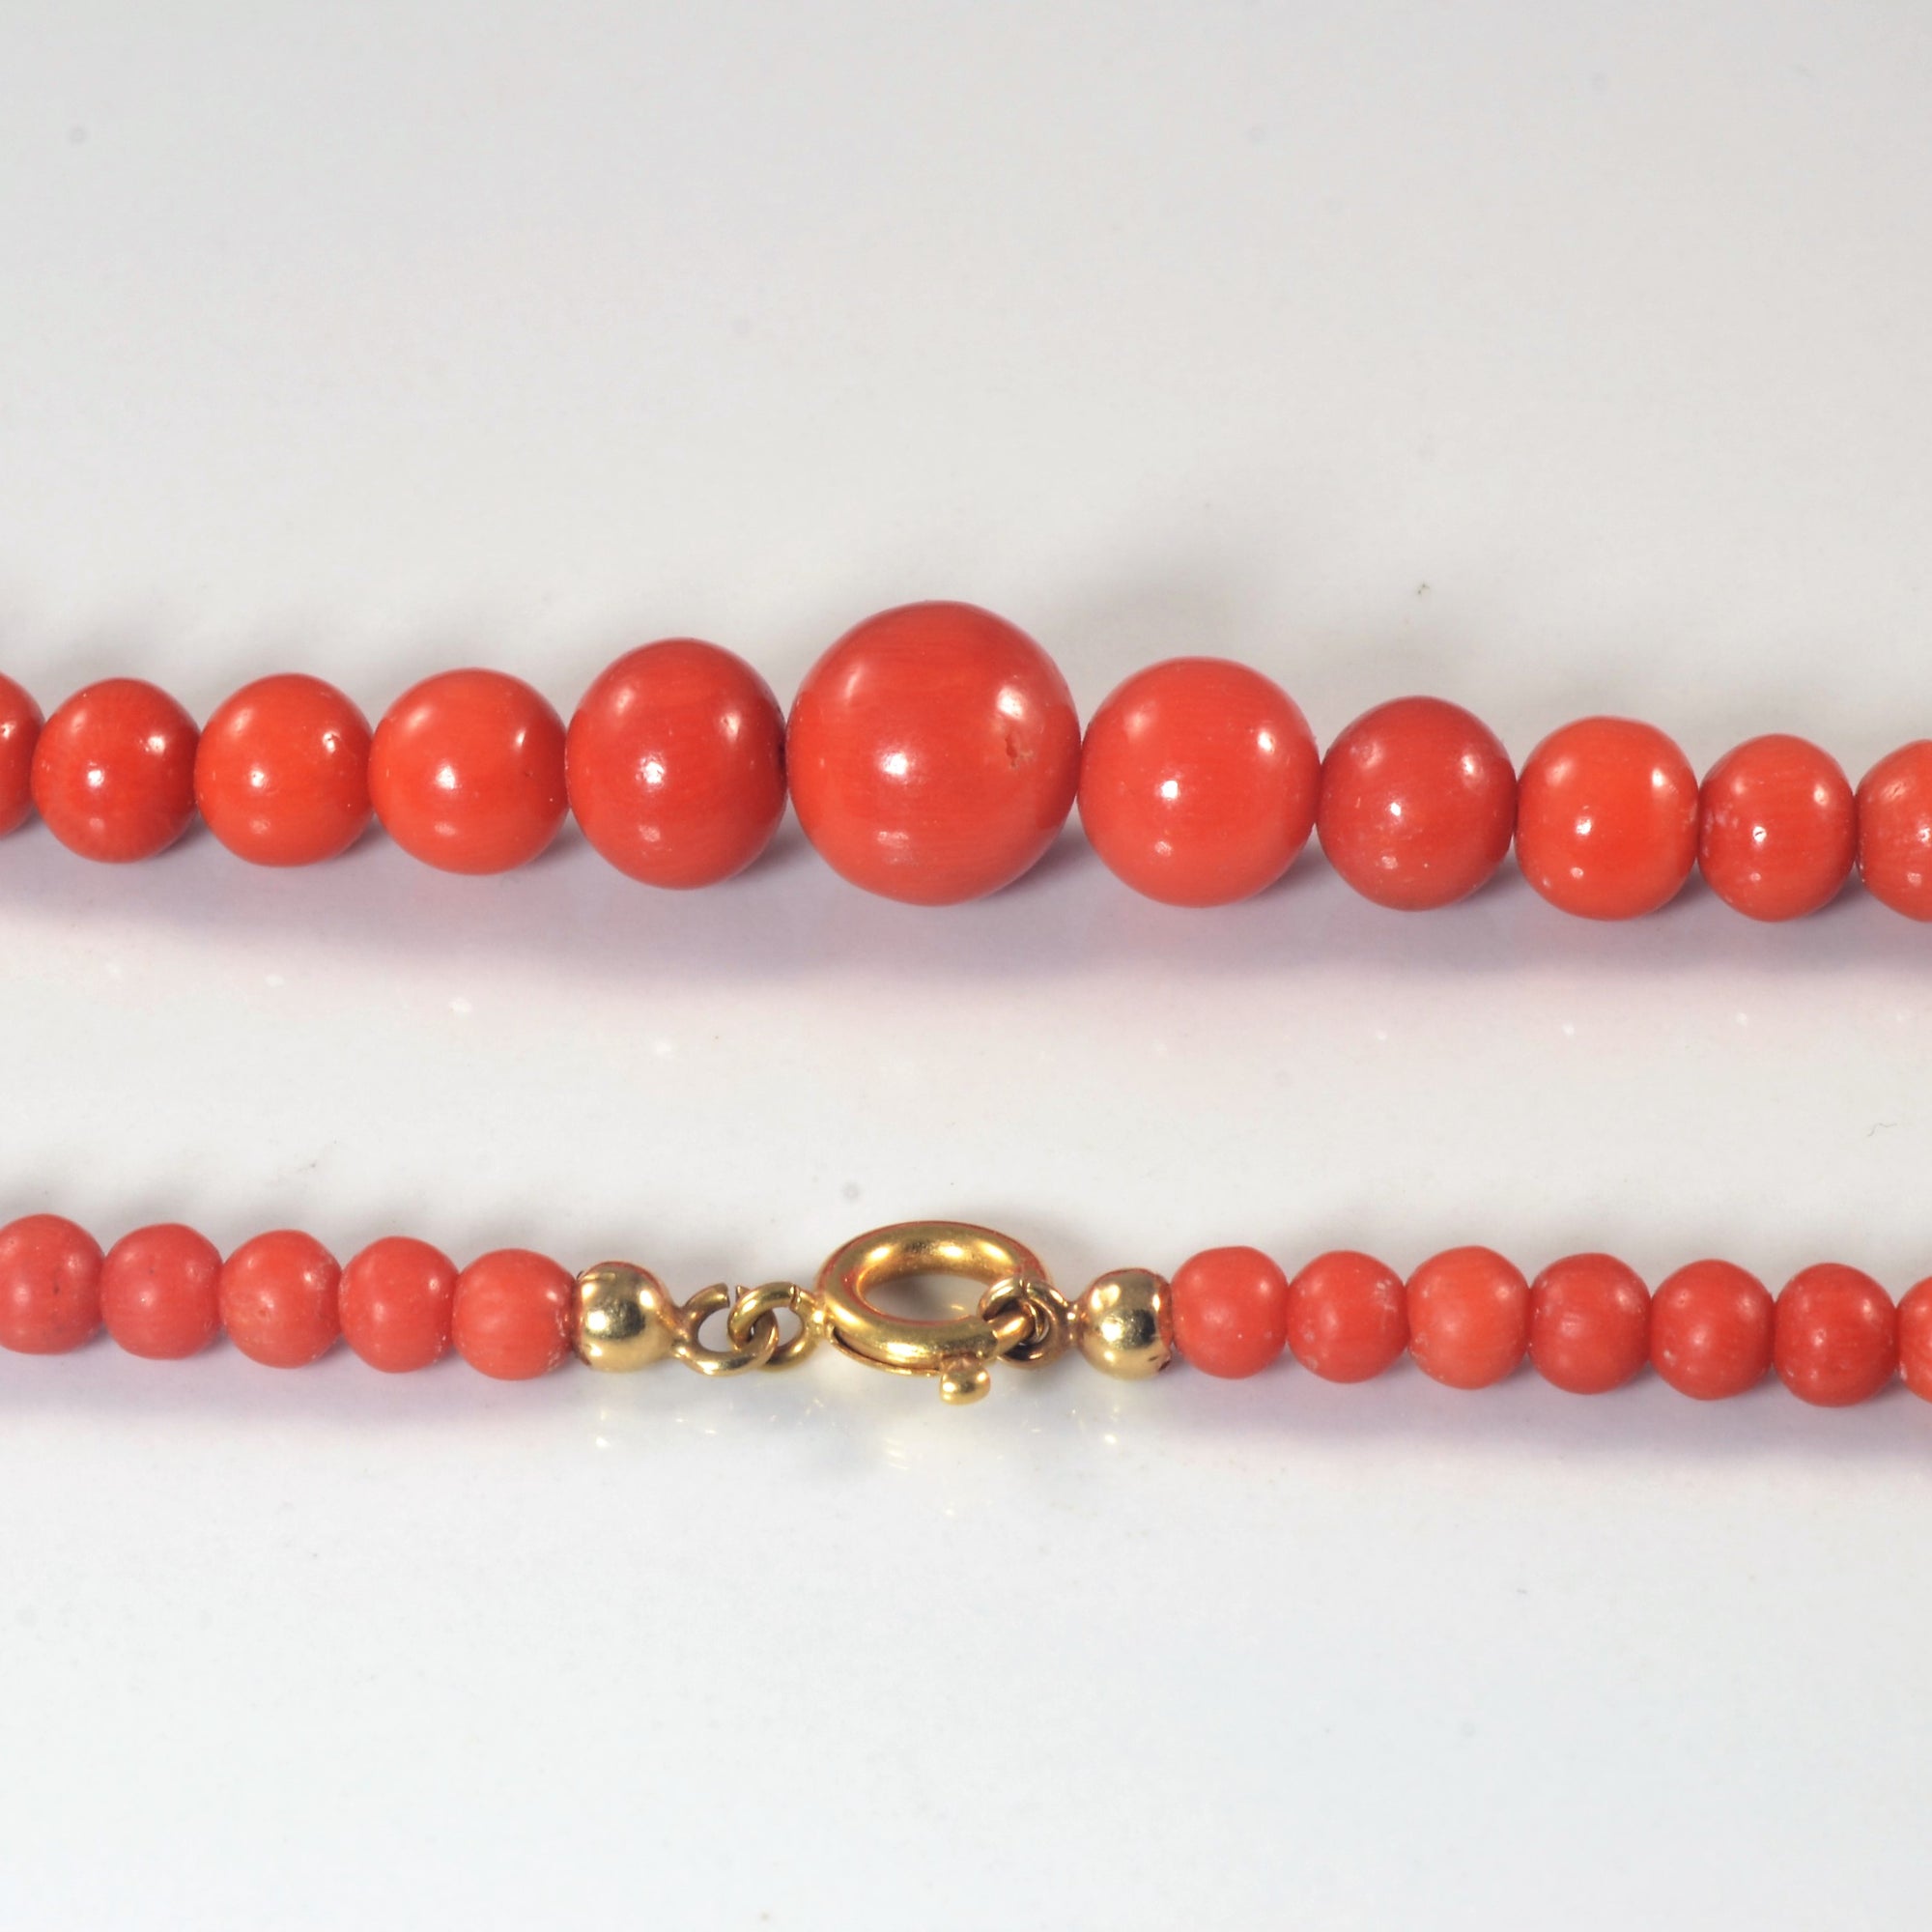 Beaded Coral Necklace | 20